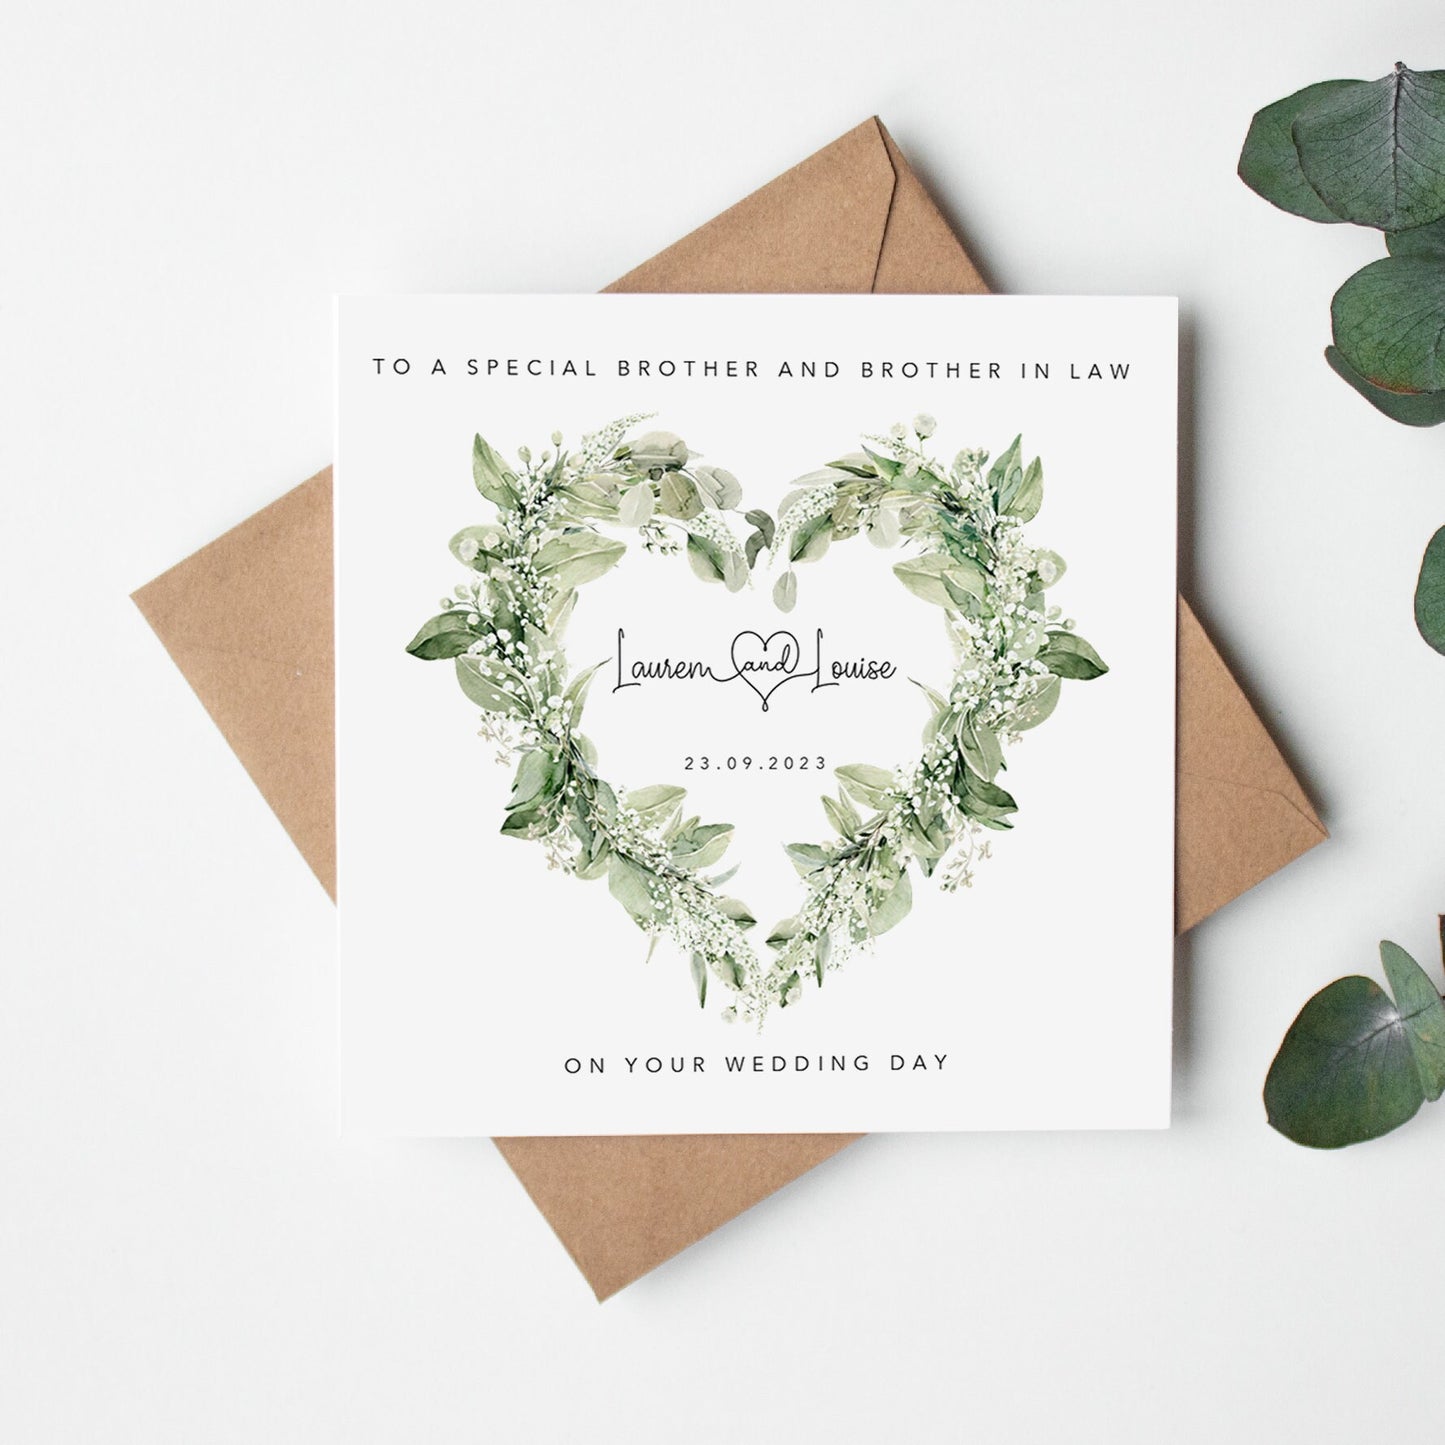 Personalised Brother and Brother in Law Wedding Card - Greenery Botanical